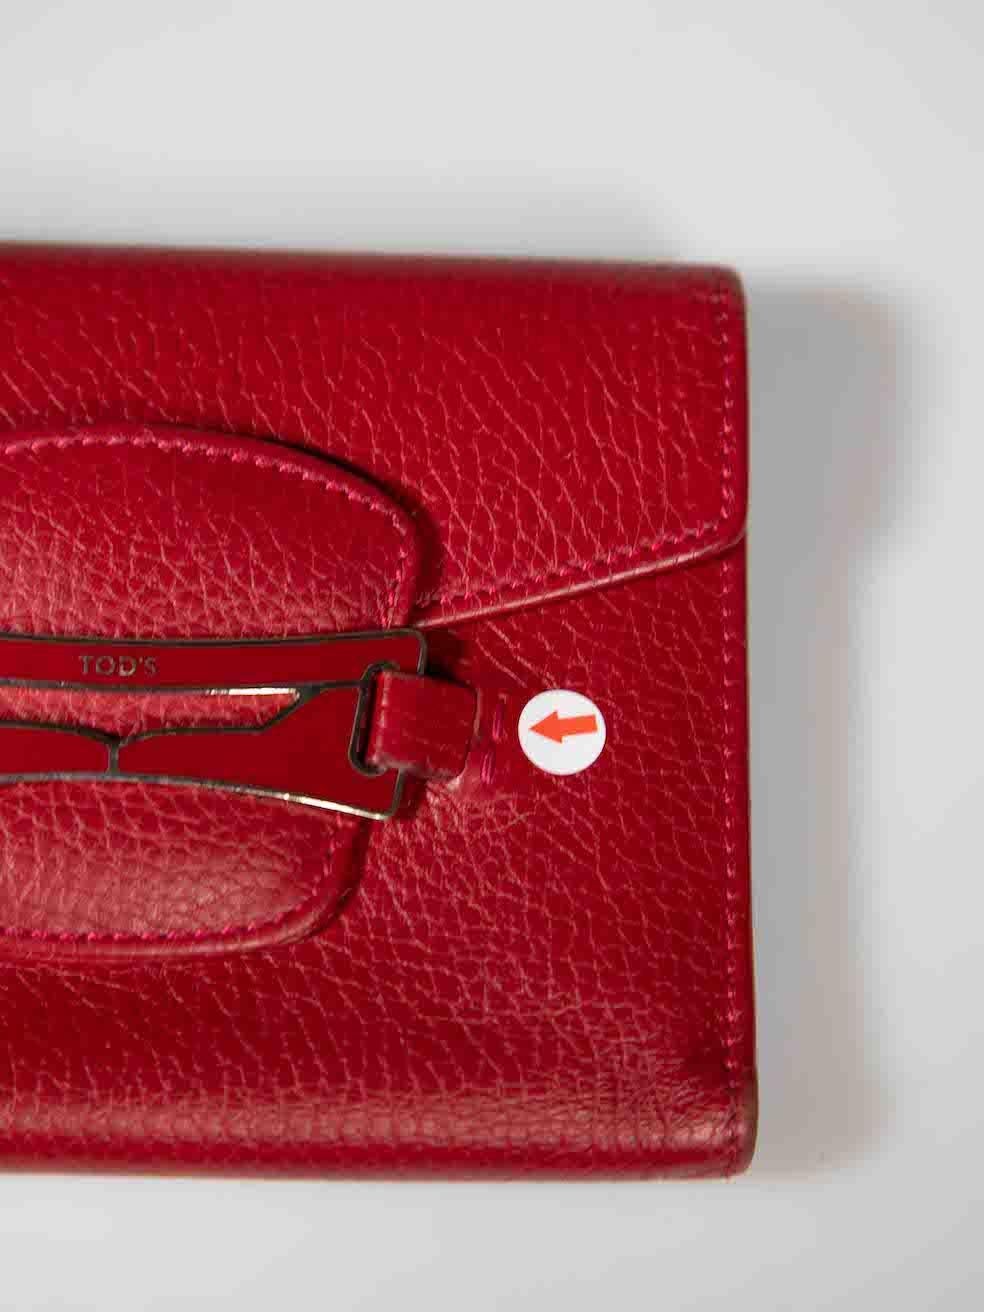 Tod's Red Leather Wallet For Sale 2